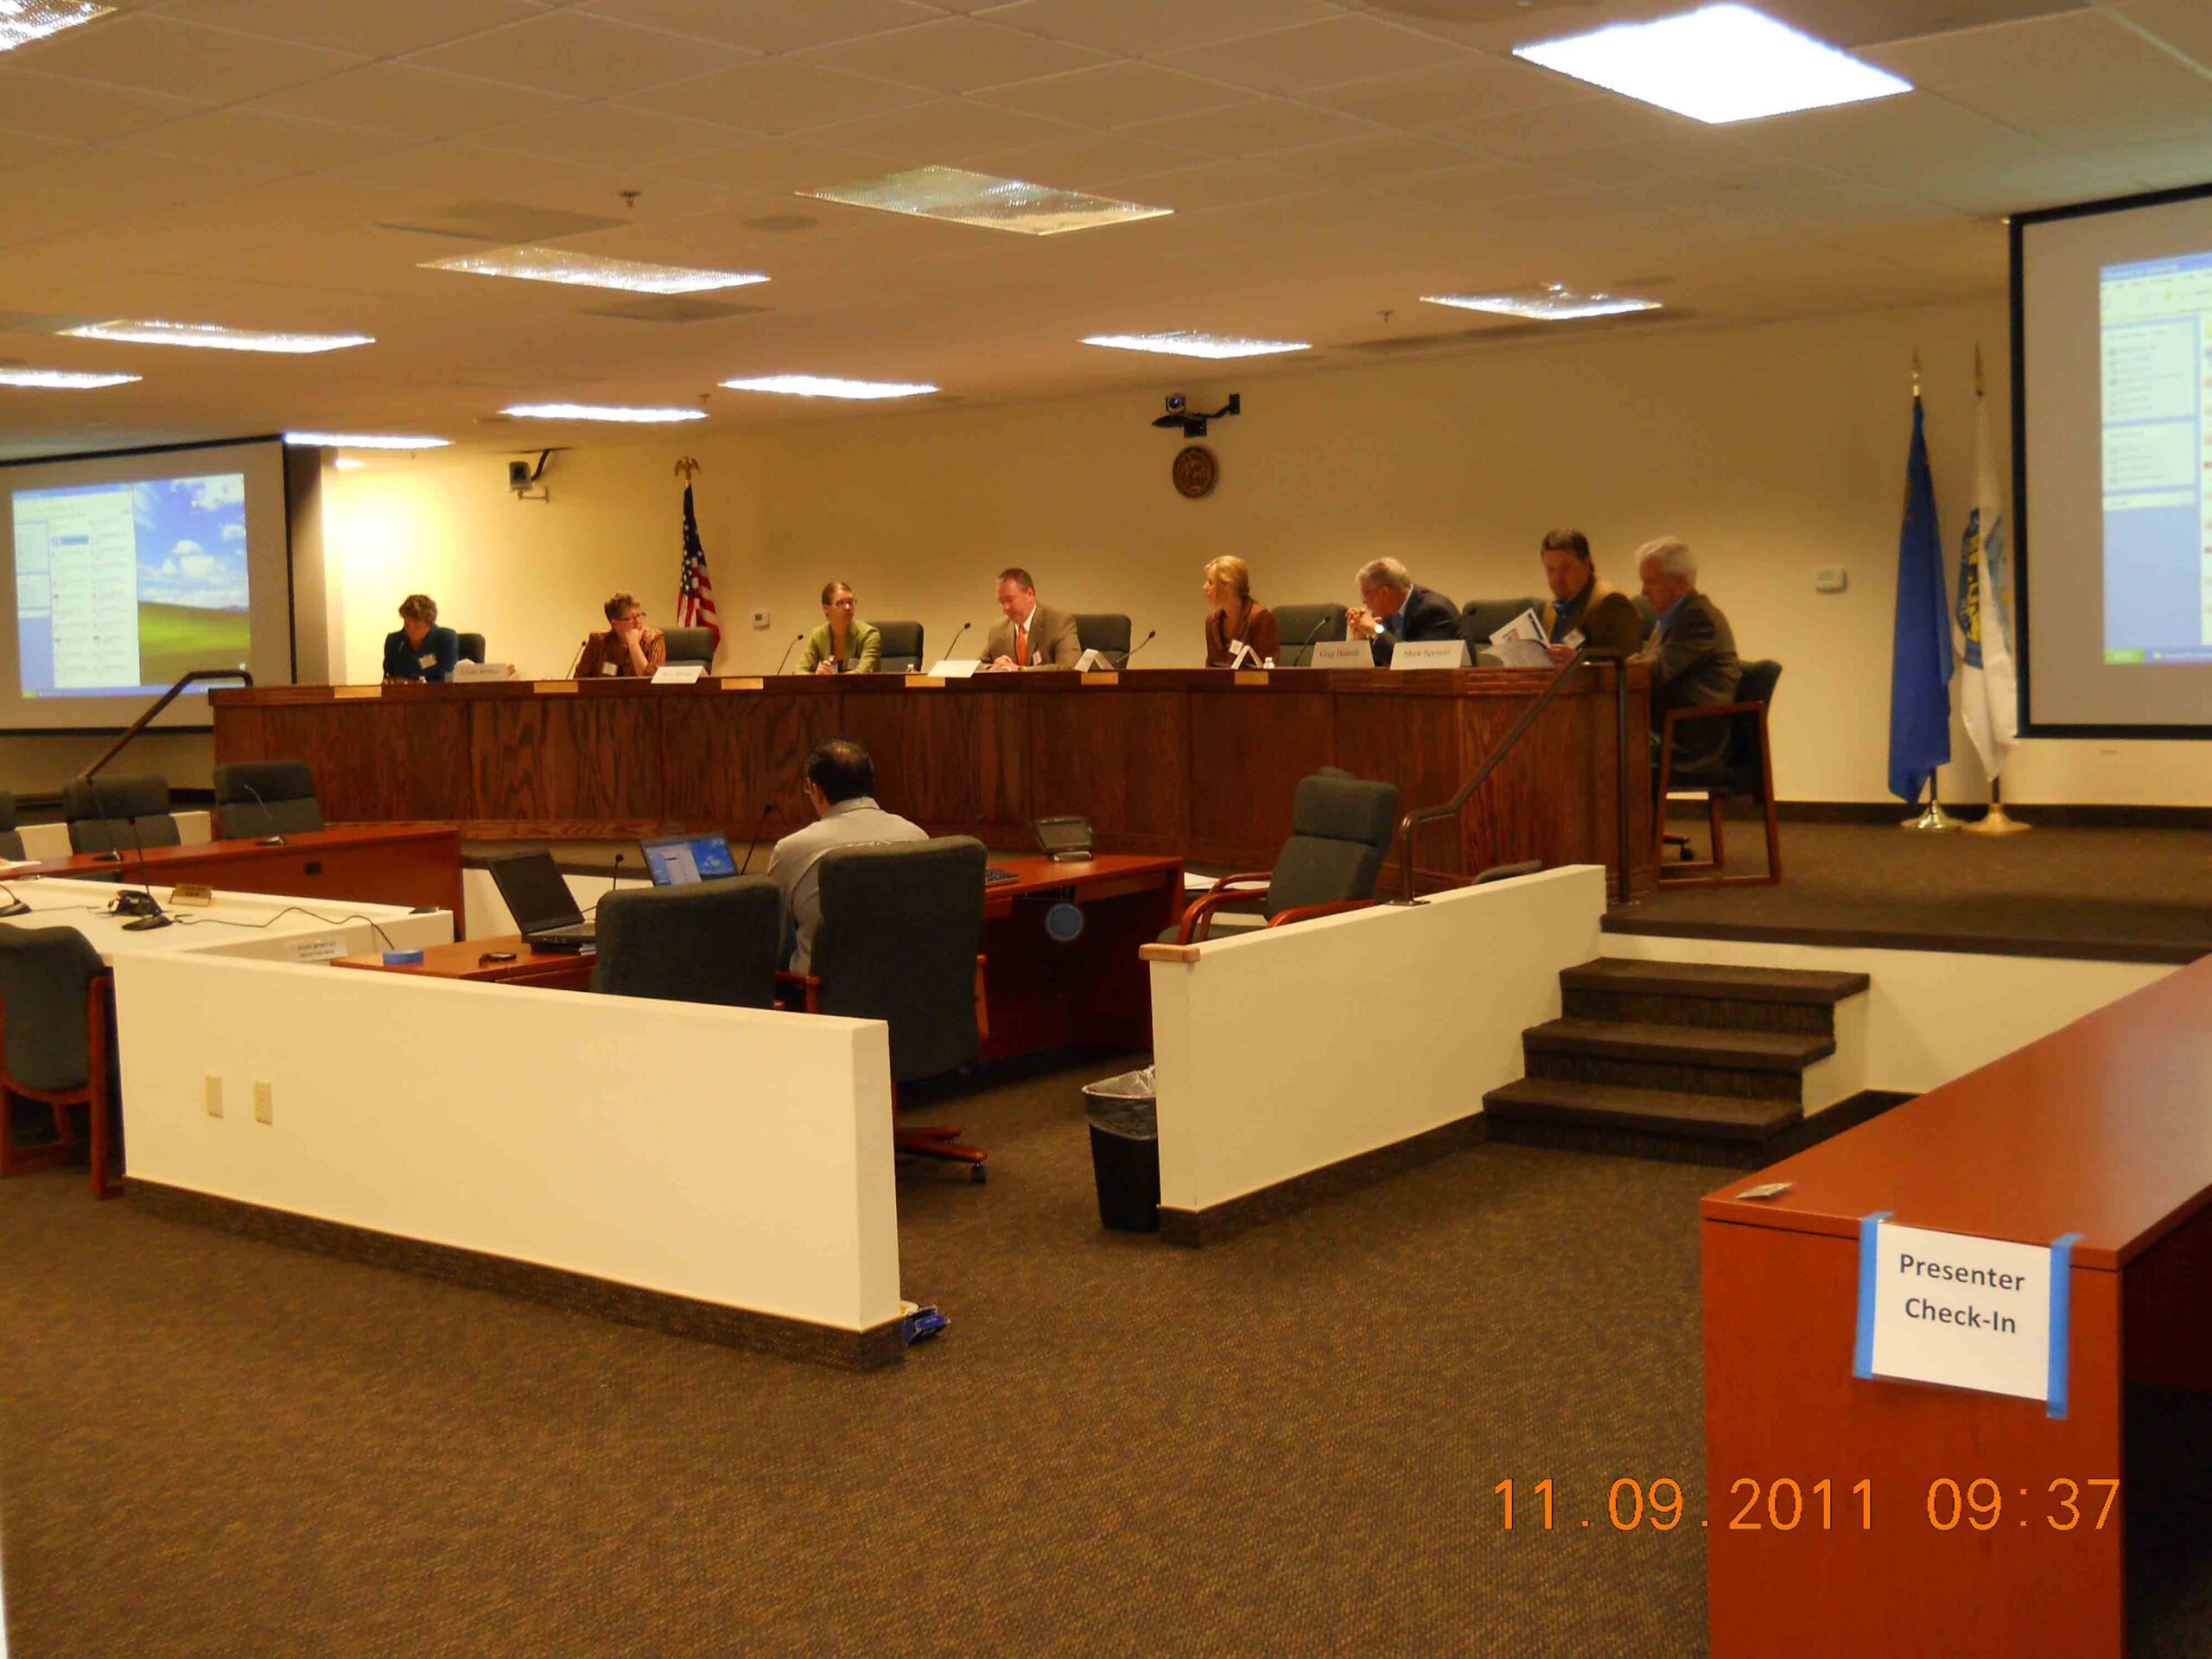 A Board of County Commissioners meeting with board members sitting at the bench in discussion